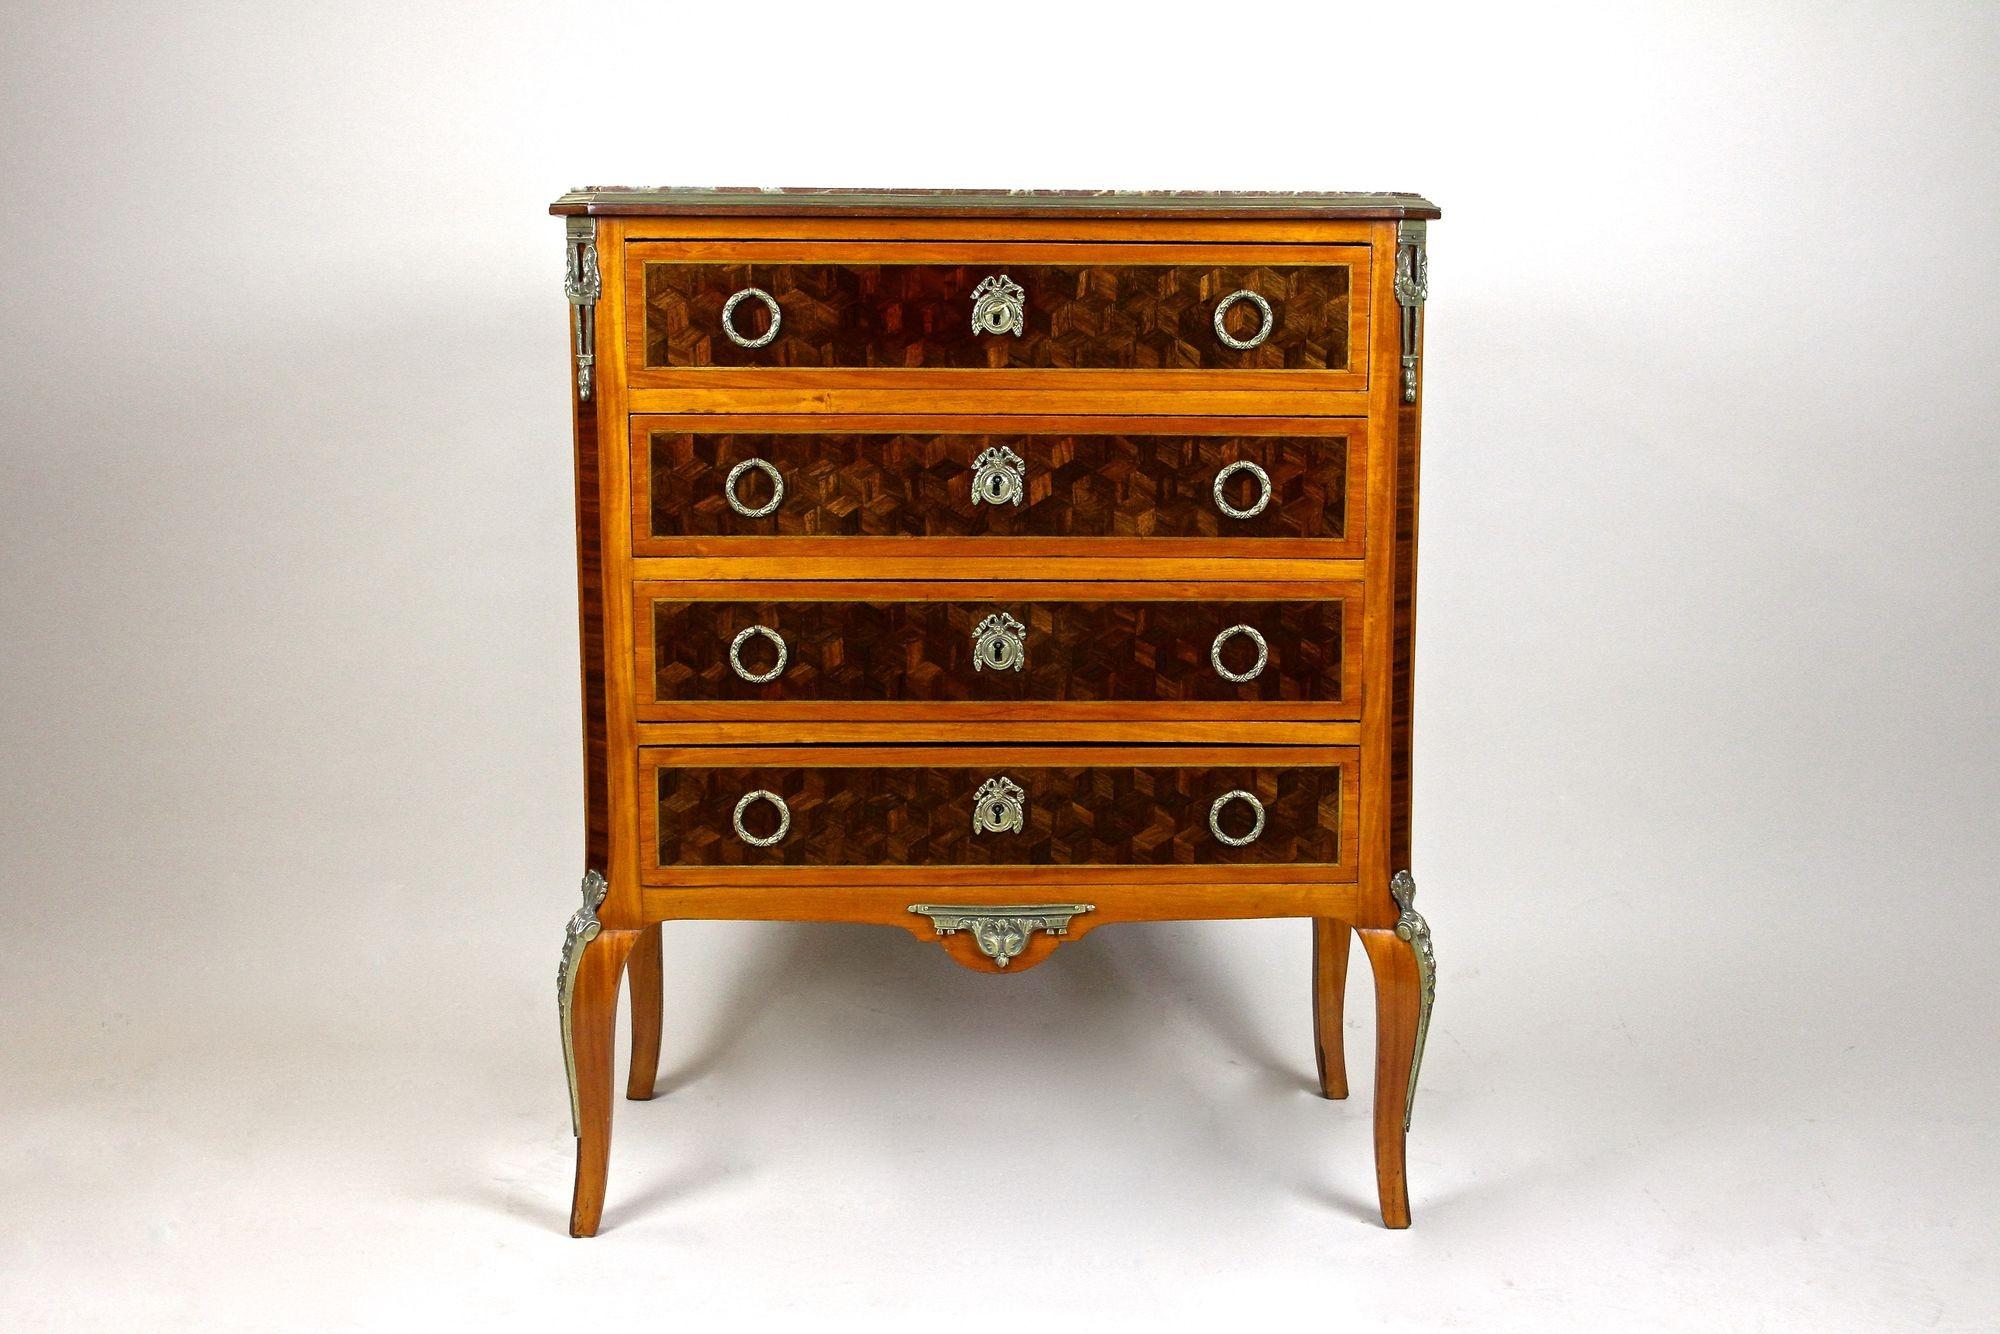 Outstanding 19th century French marquetry chest of drawers from the period around 1870. Providing four lockable drawers, this absolute eye-catching dresser was made of fine cherrywood and impresses with its elaborately set marquetry work on the